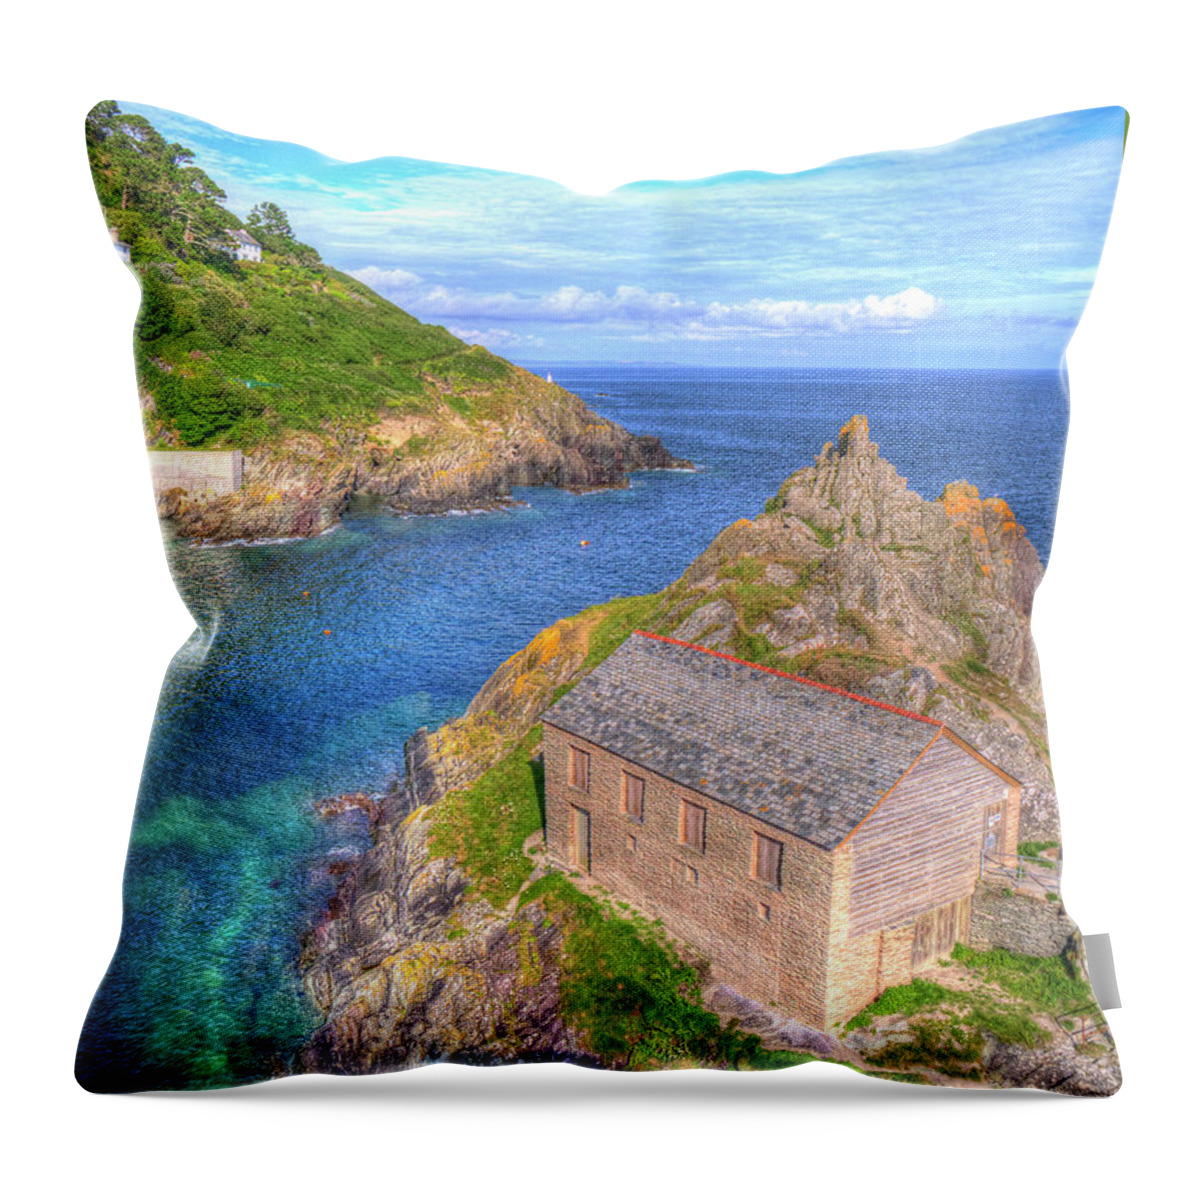 Polperro Throw Pillow featuring the photograph Polperro Entrance by Hazy Apple